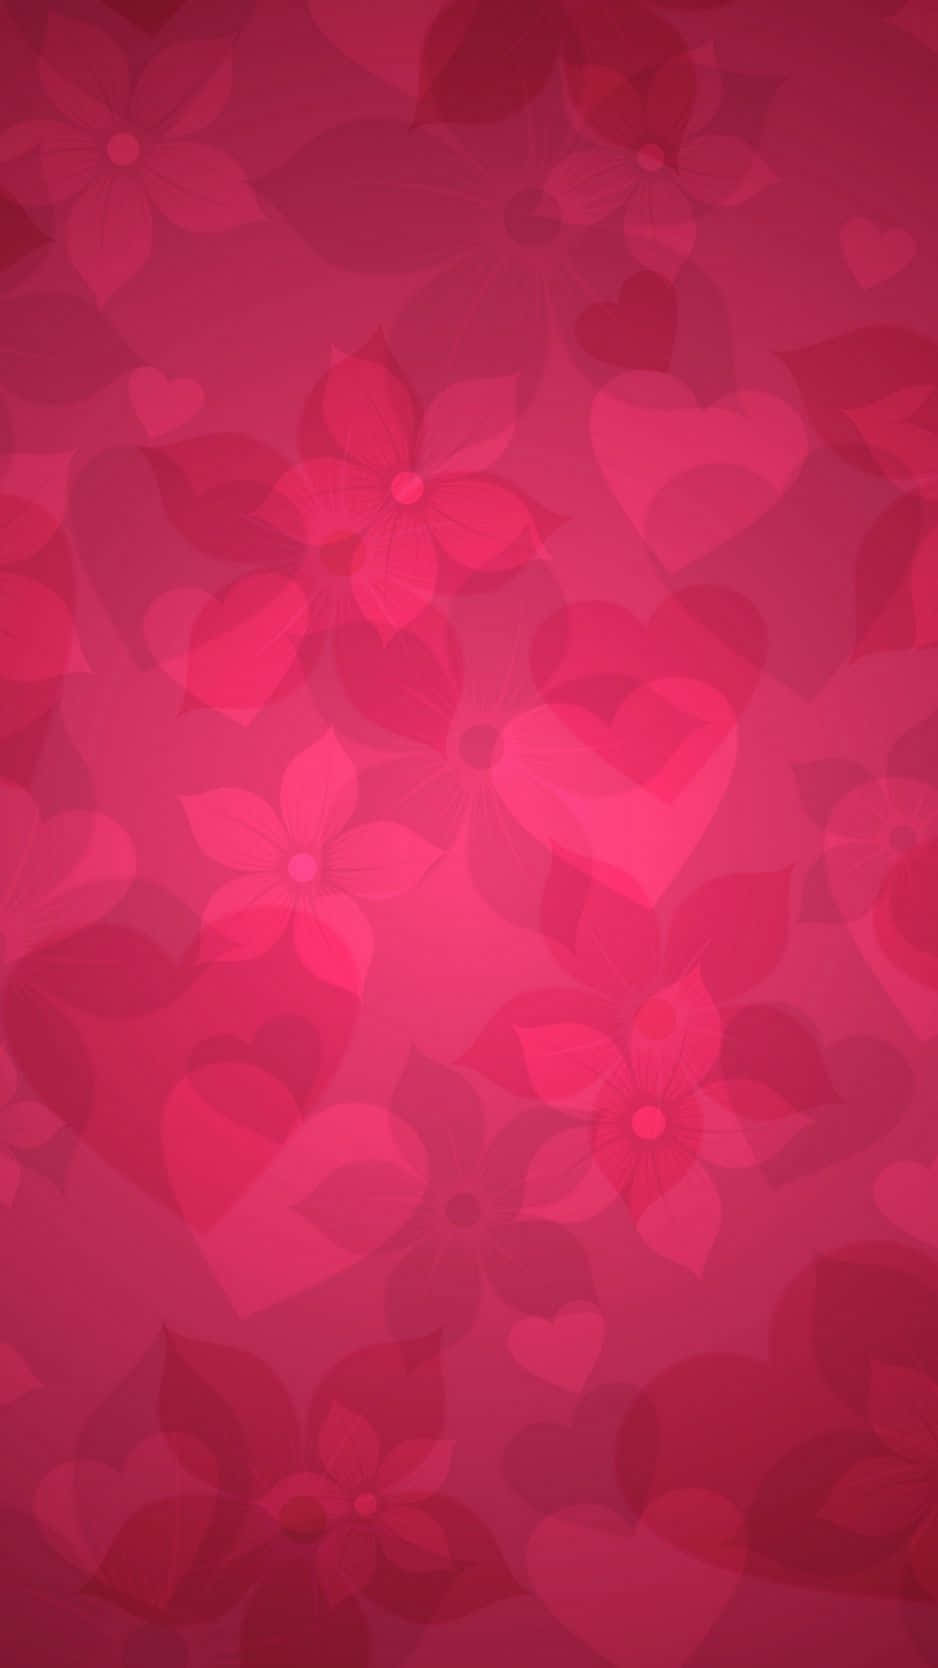 Flowers And Pink Hearts Iphone Wallpaper